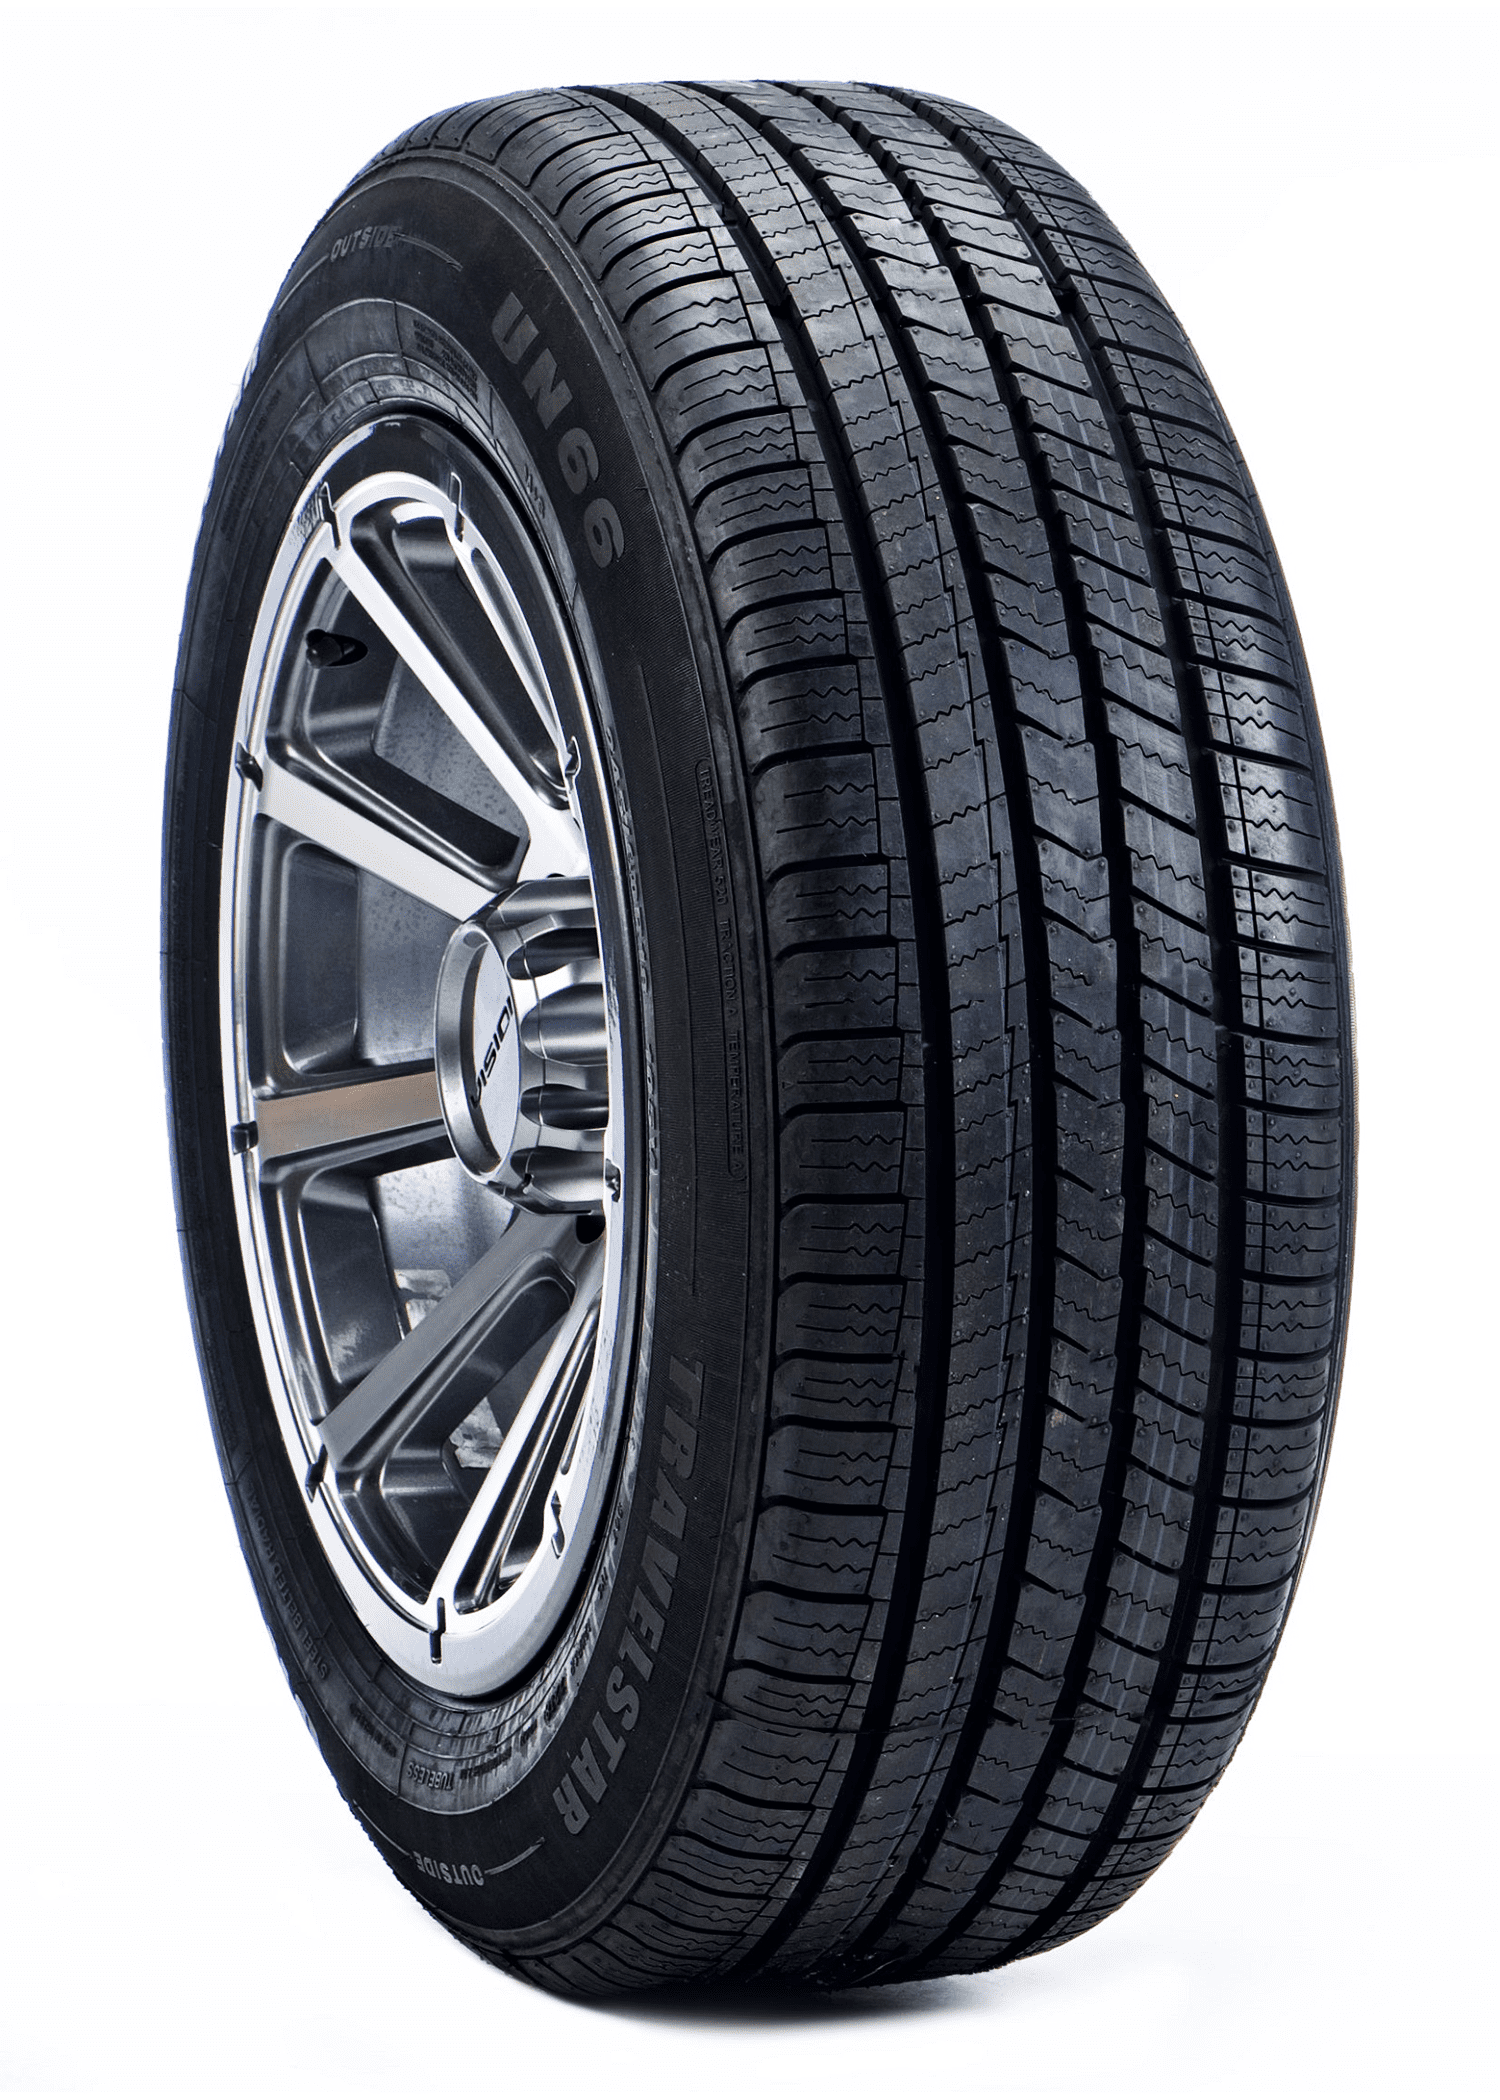 Maxxis MA-1 Performance P185/80R13 90S Passenger Tire